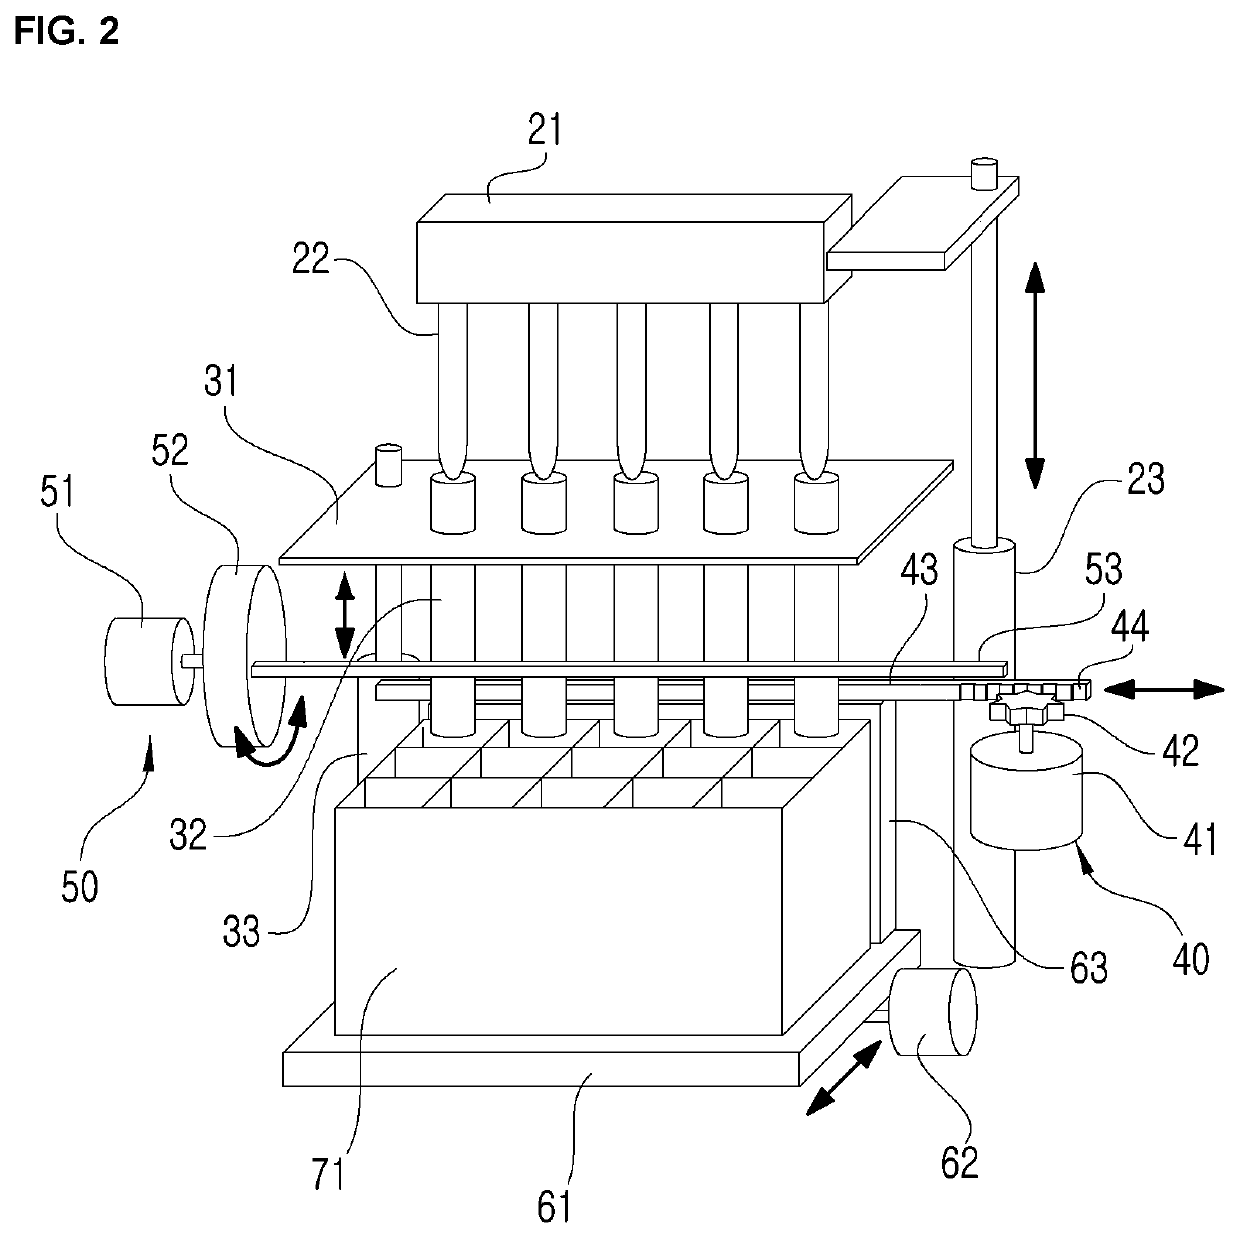 Biological material extraction apparatus